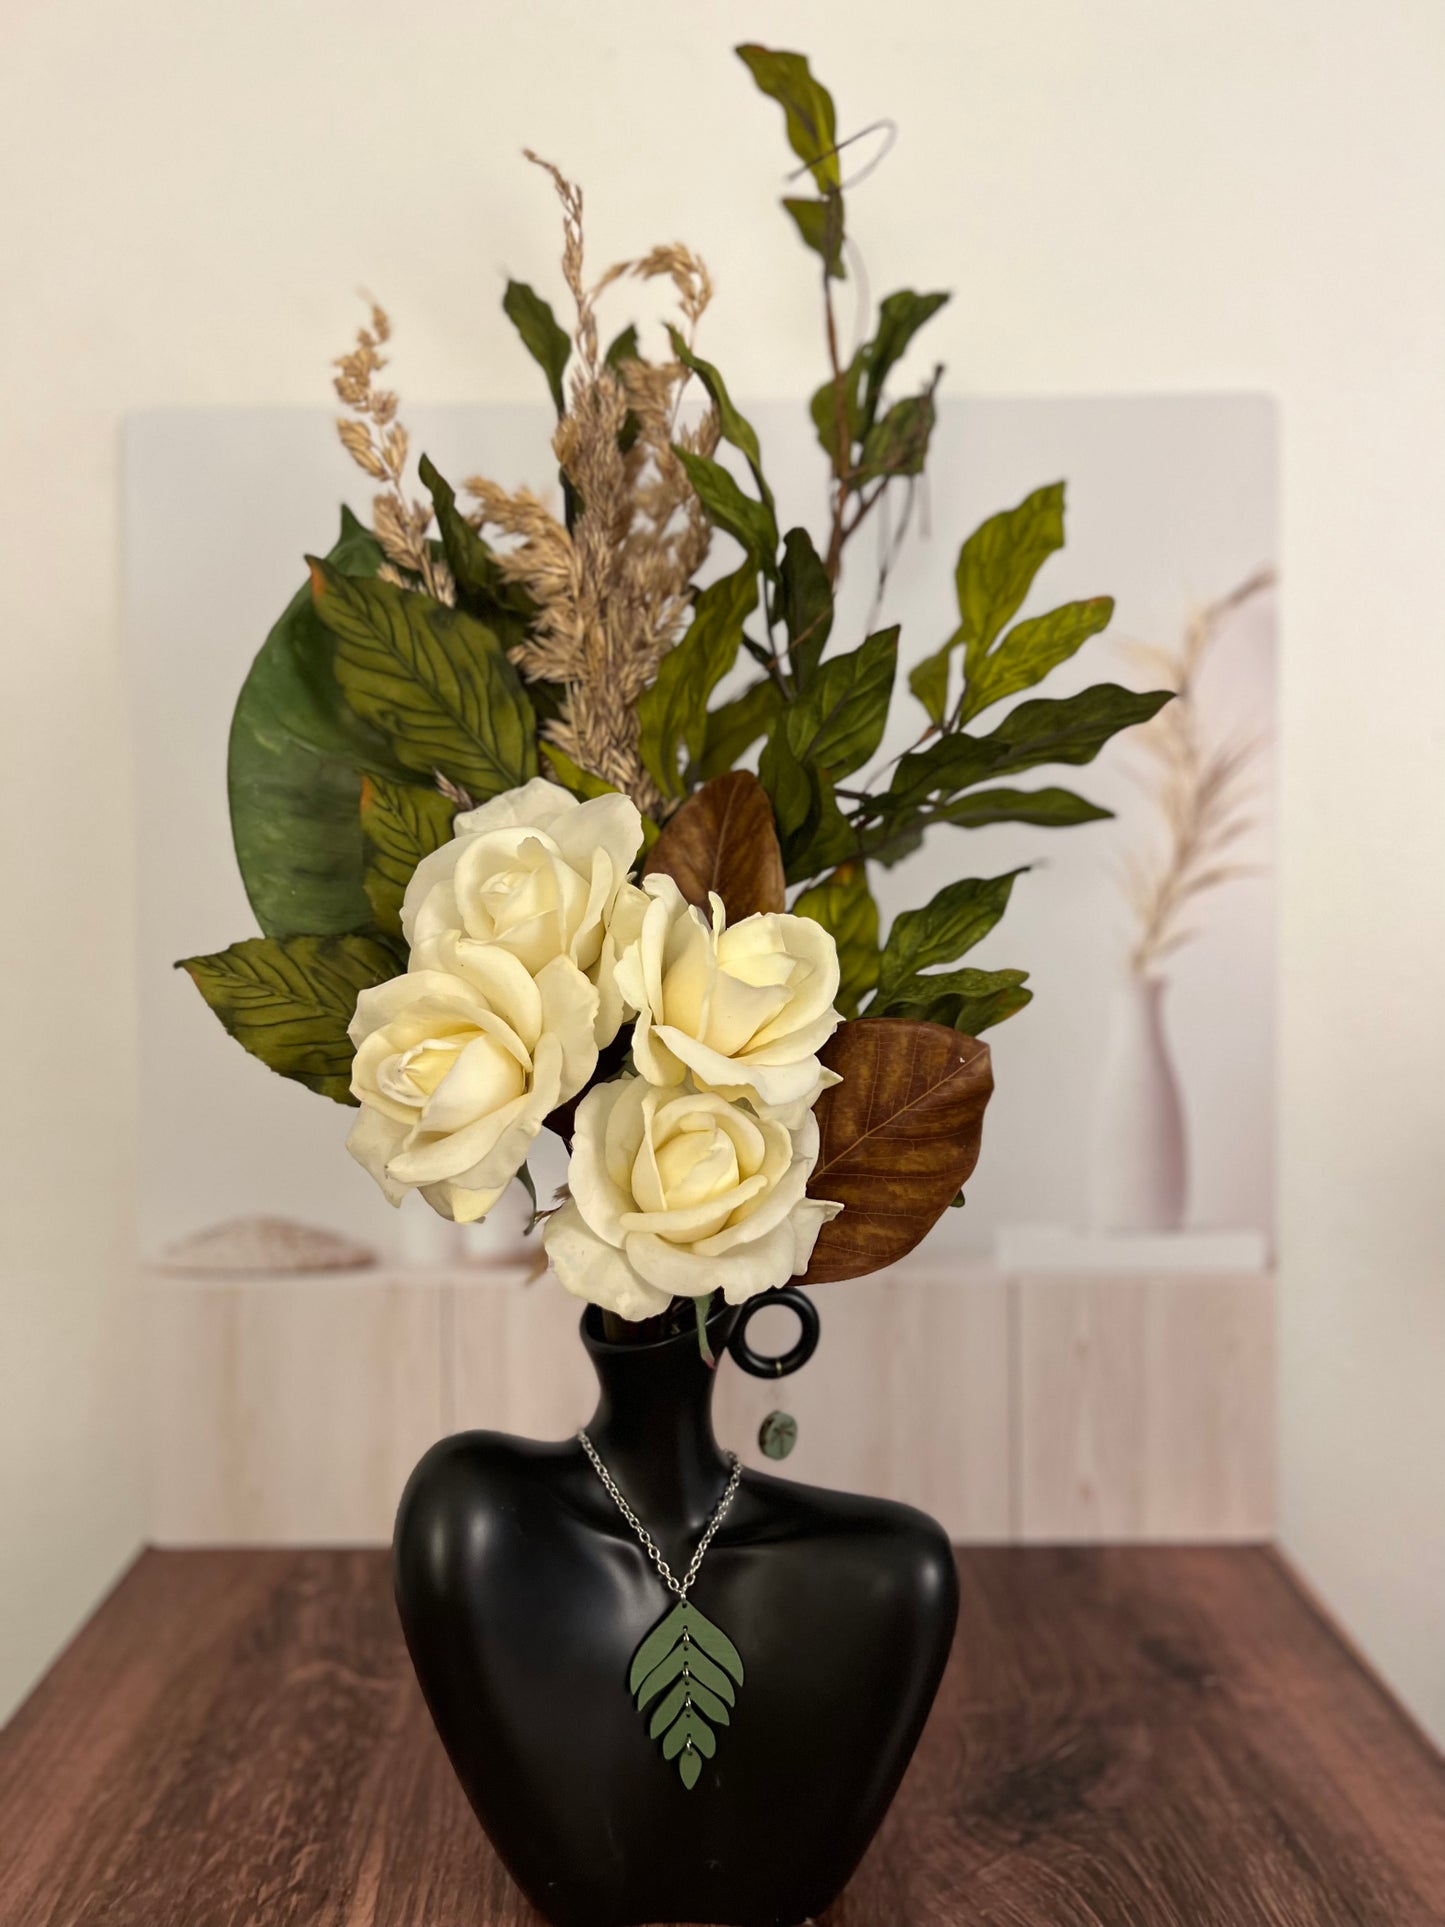 Artificial flower arrangement in a vase. Ceramic centerpiece with real touch roses and preserved florals Flower arrangement for home decor.